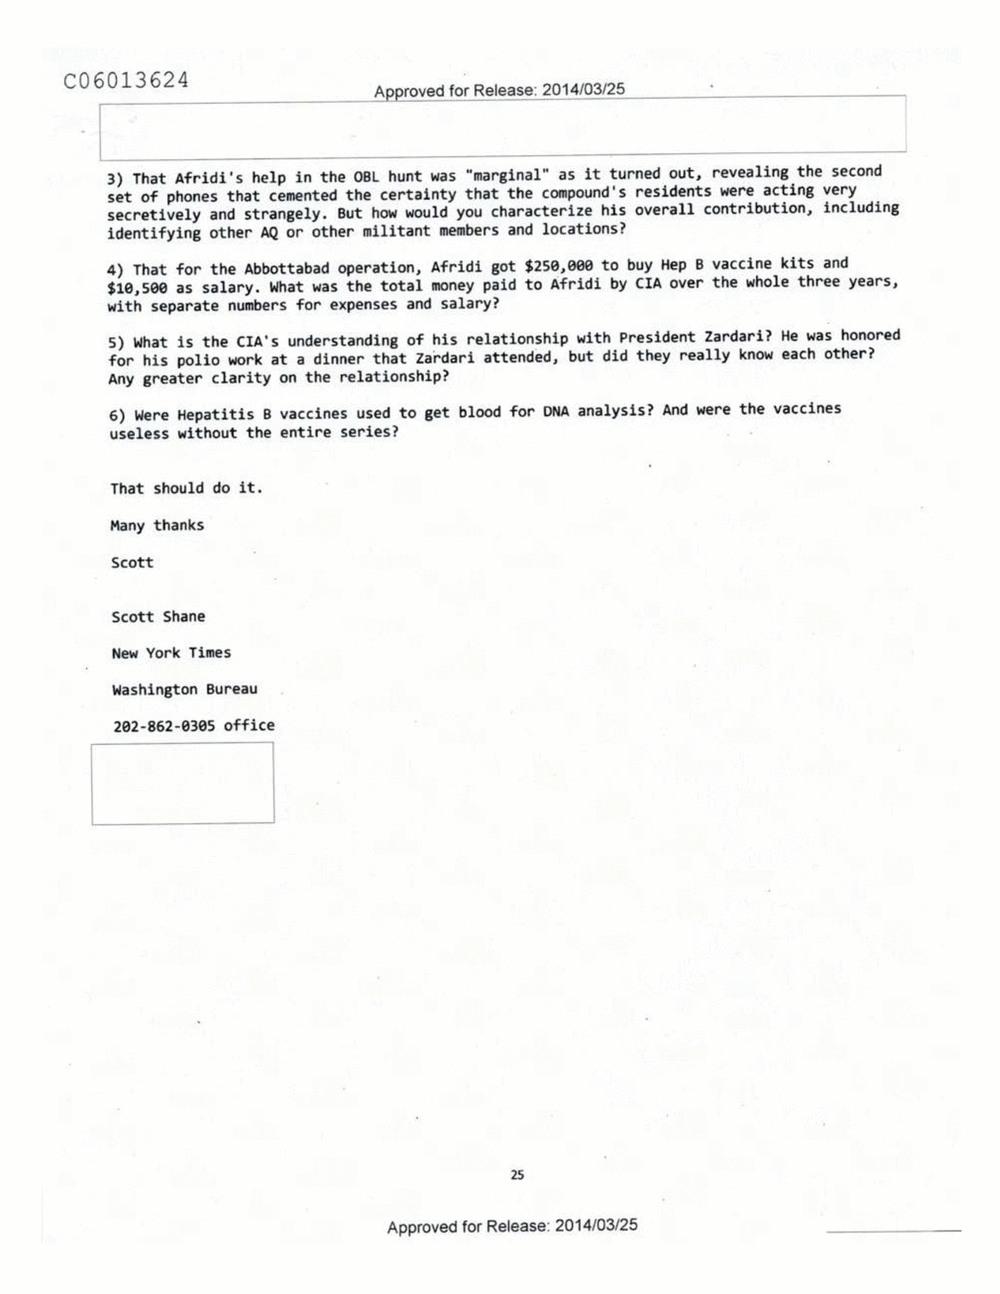 Page 459 from Email Correspondence Between Reporters and CIA Flacks